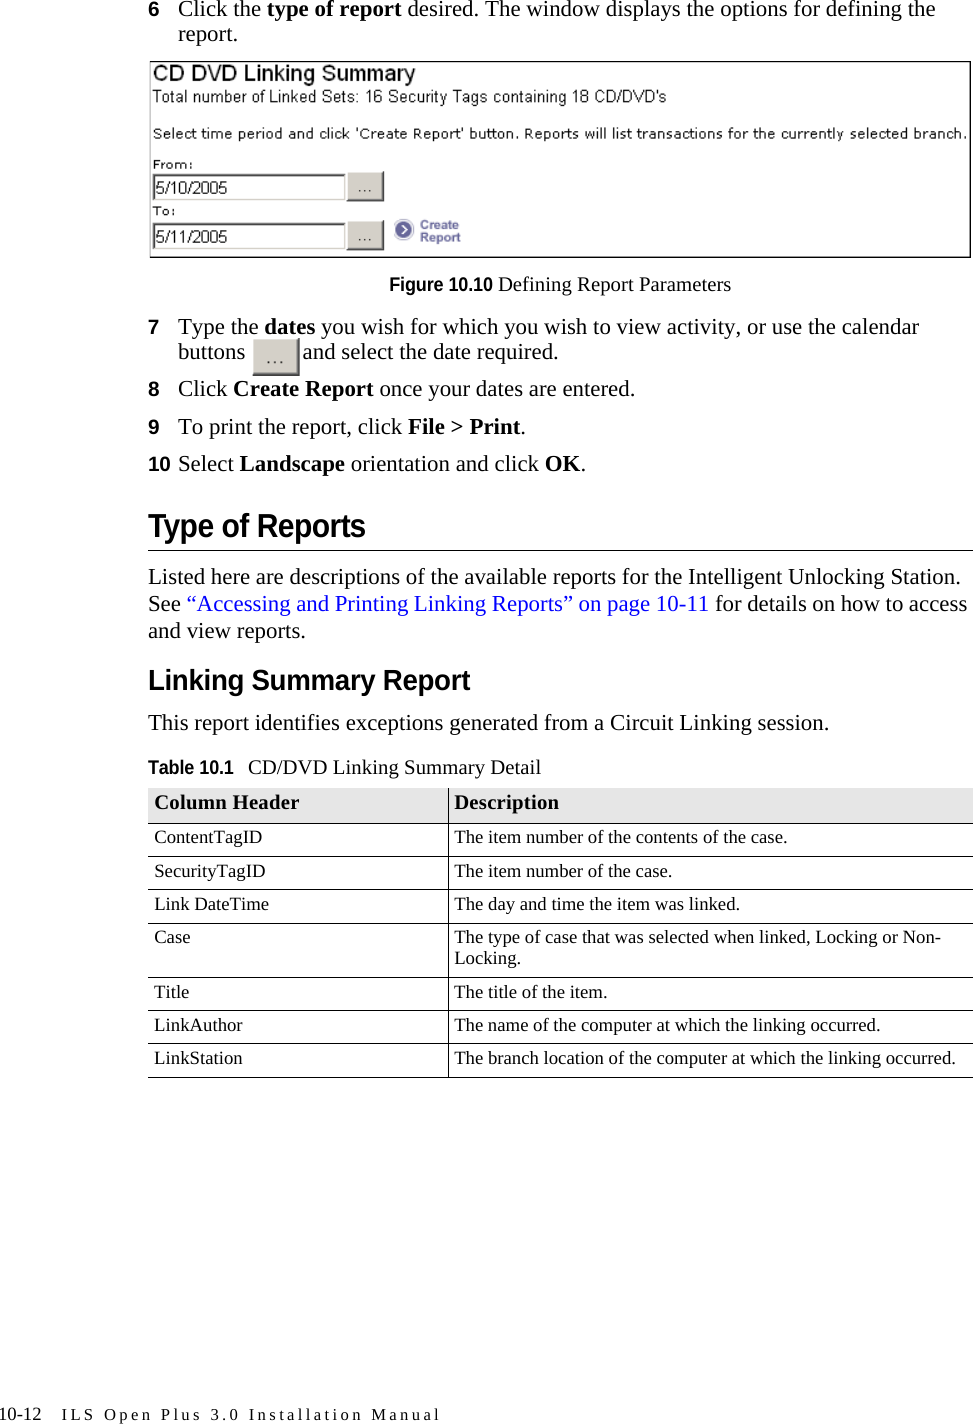 10-12 ILS Open Plus 3.0 Installation Manual6Click the type of report desired. The window displays the options for defining the report.Figure 10.10 Defining Report Parameters7Type the dates you wish for which you wish to view activity, or use the calendar buttons  and select the date required.8Click Create Report once your dates are entered. 9To print the report, click File &gt; Print. 10 Select Landscape orientation and click OK.Type of ReportsListed here are descriptions of the available reports for the Intelligent Unlocking Station. See “Accessing and Printing Linking Reports” on page 10-11 for details on how to access and view reports.Linking Summary ReportThis report identifies exceptions generated from a Circuit Linking session.Table 10.1CD/DVD Linking Summary DetailColumn Header DescriptionContentTagID The item number of the contents of the case.SecurityTagID The item number of the case.Link DateTime The day and time the item was linked.Case The type of case that was selected when linked, Locking or Non-Locking.Title The title of the item.LinkAuthor The name of the computer at which the linking occurred.LinkStation The branch location of the computer at which the linking occurred.